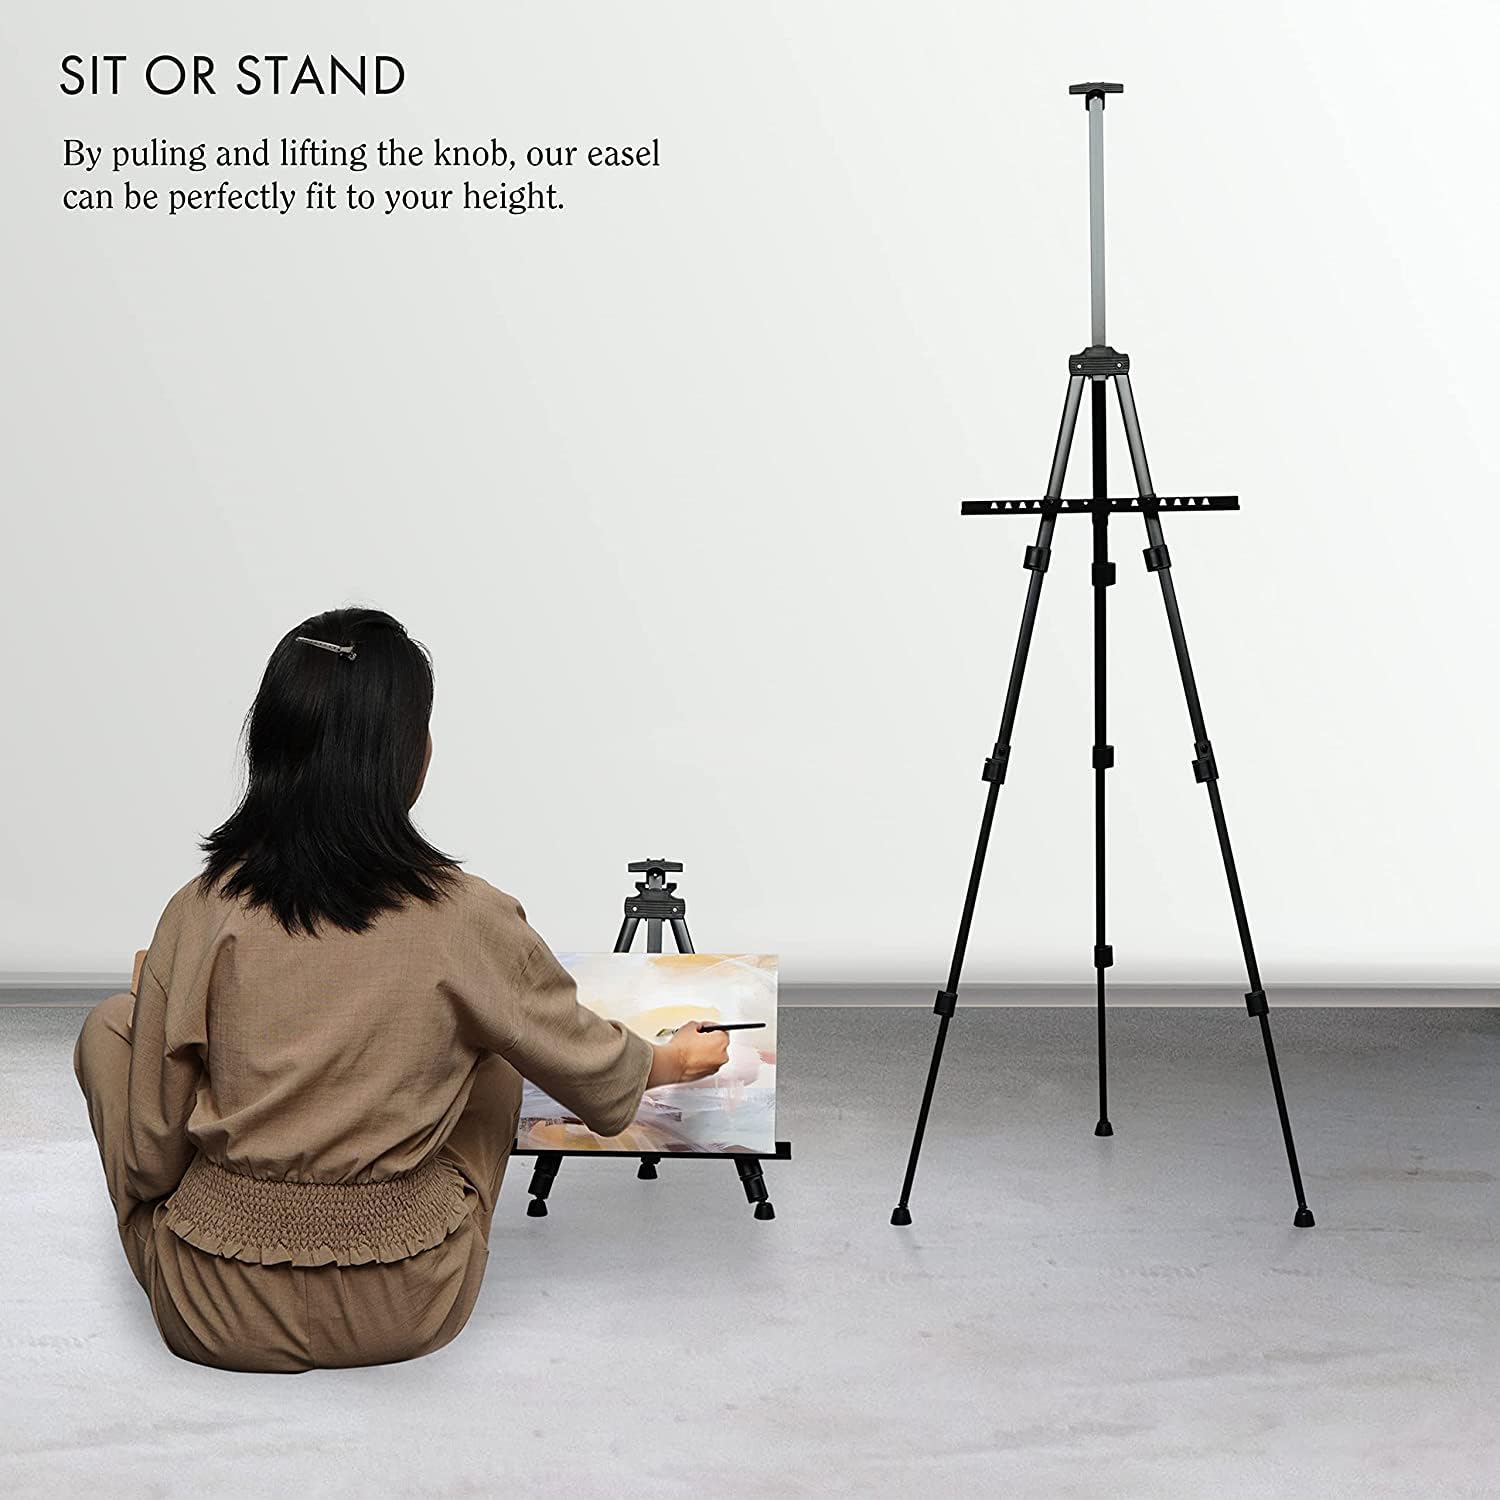 US IN STOCK] 63 Artist Easel Stand Aluminum Metal Tripod Display